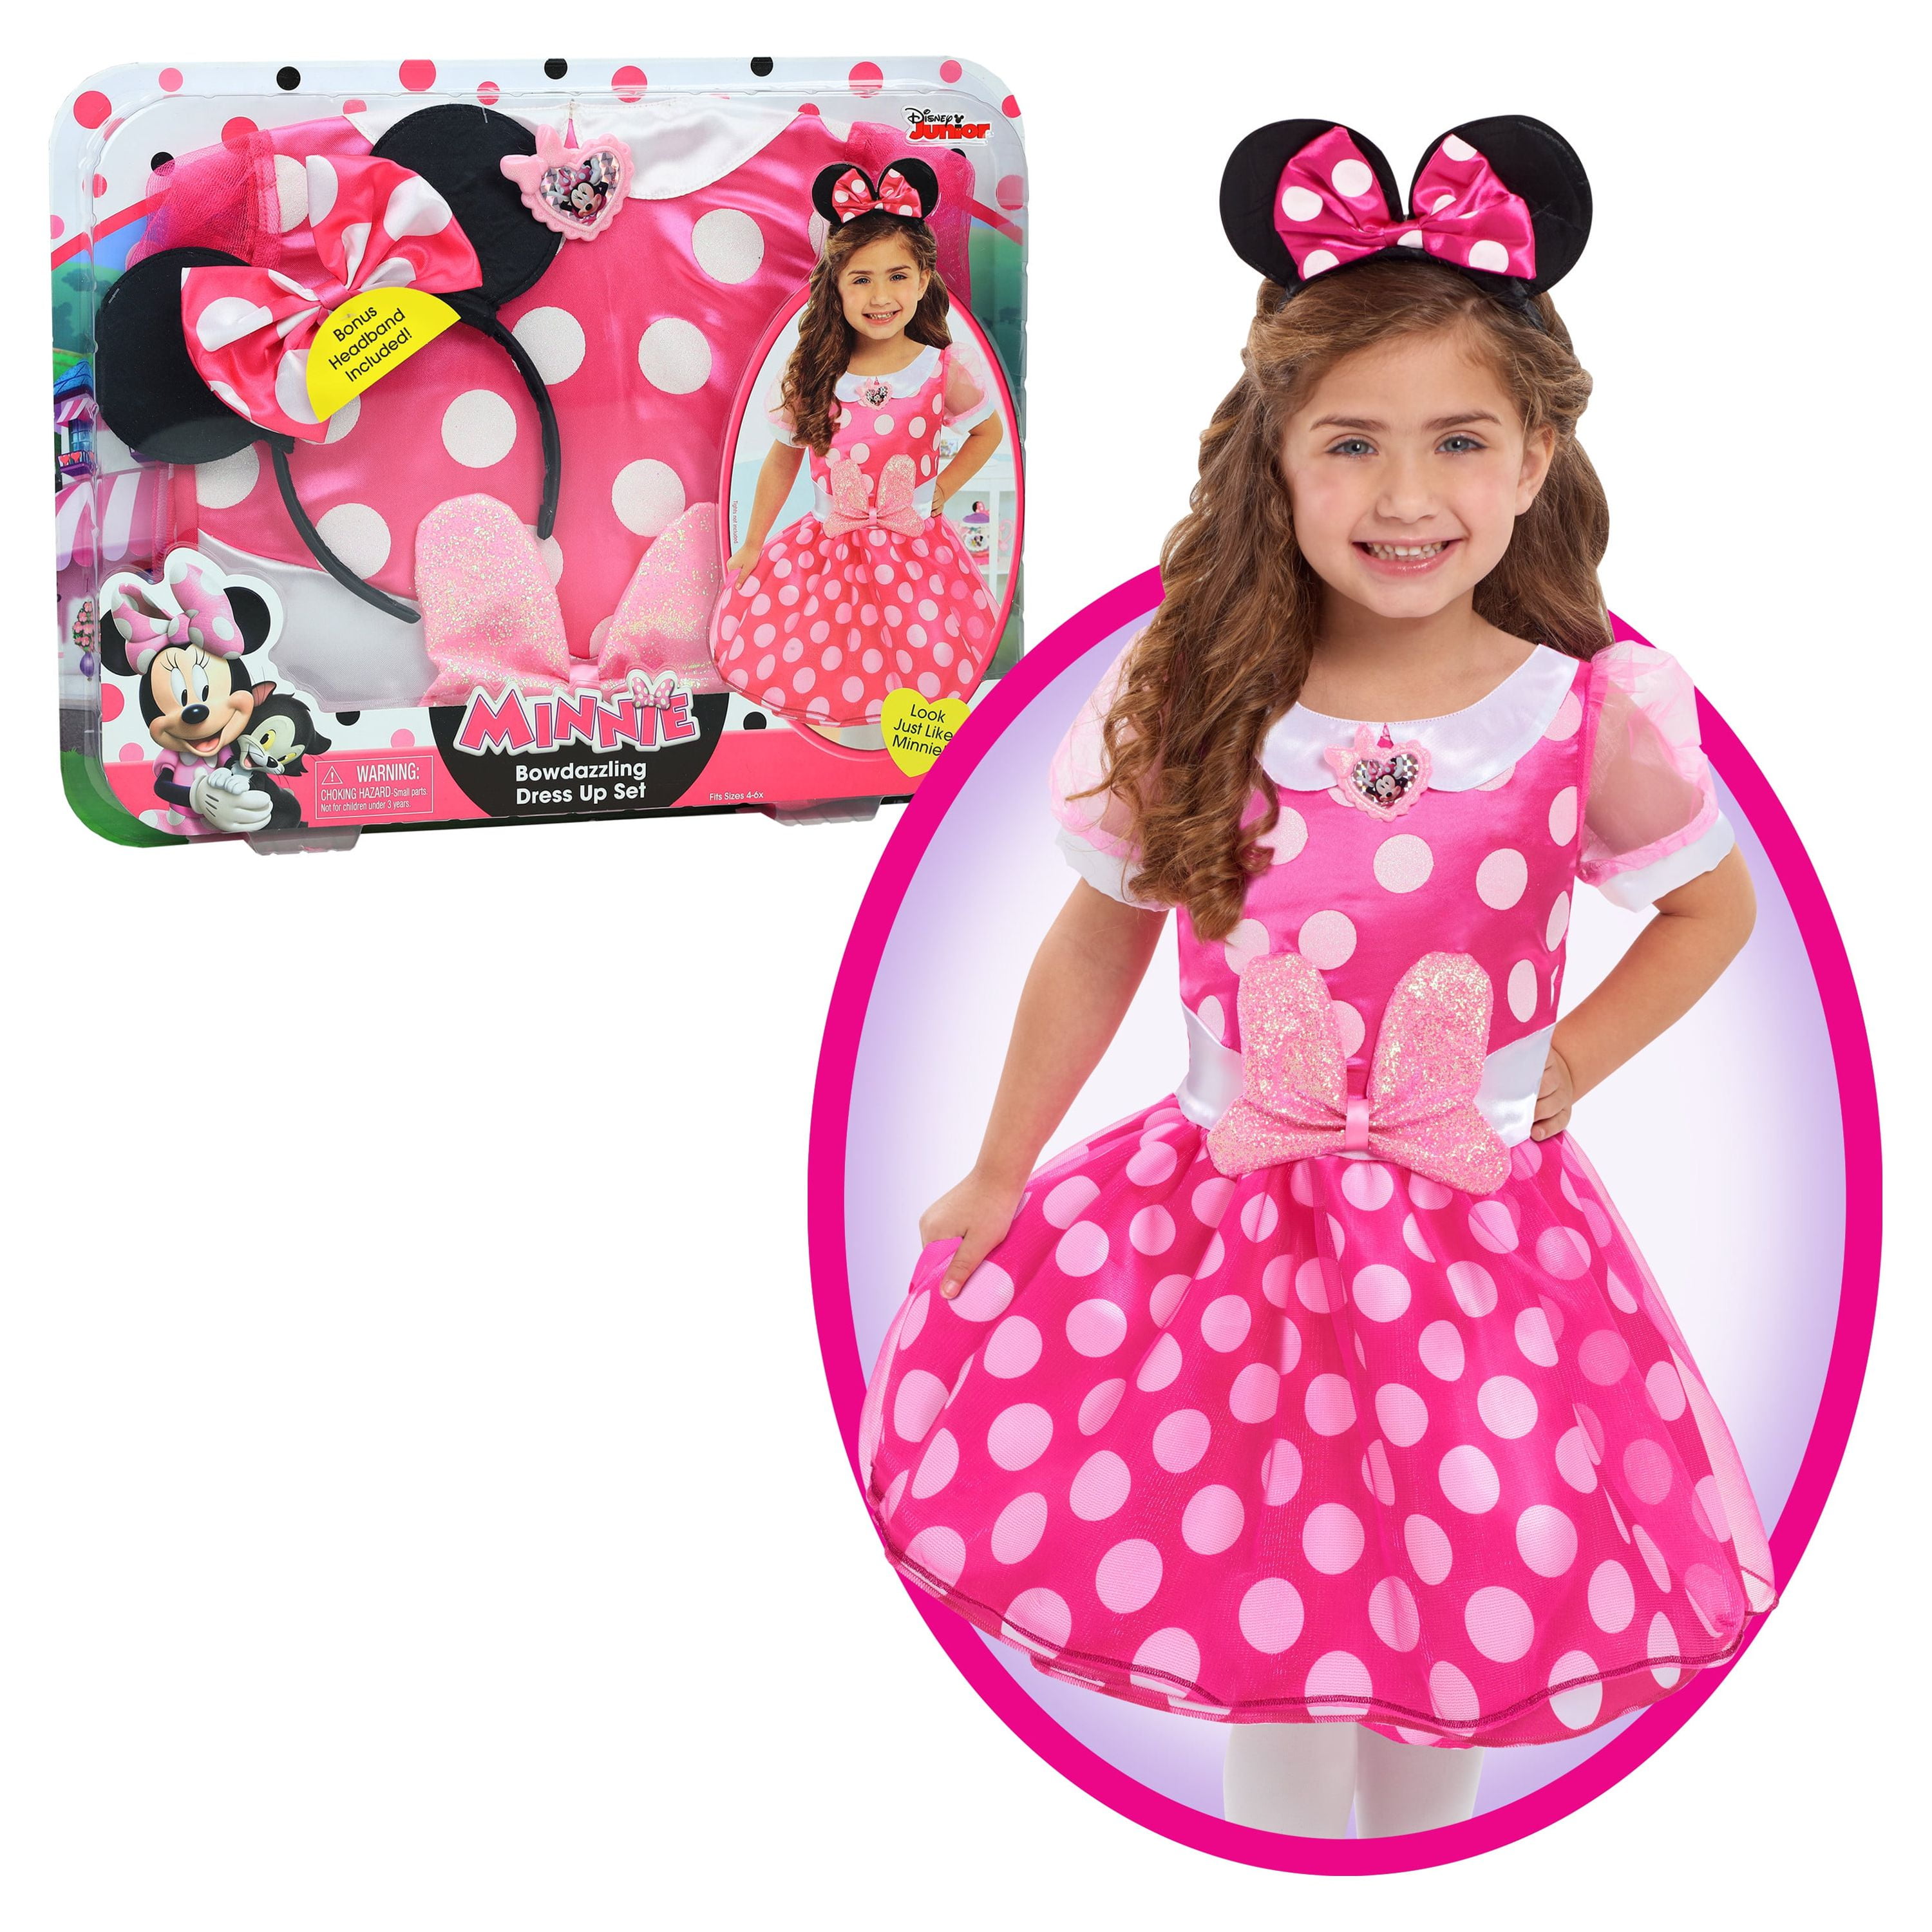 Disney Store Minnie Mouse Pink Costume For Kids